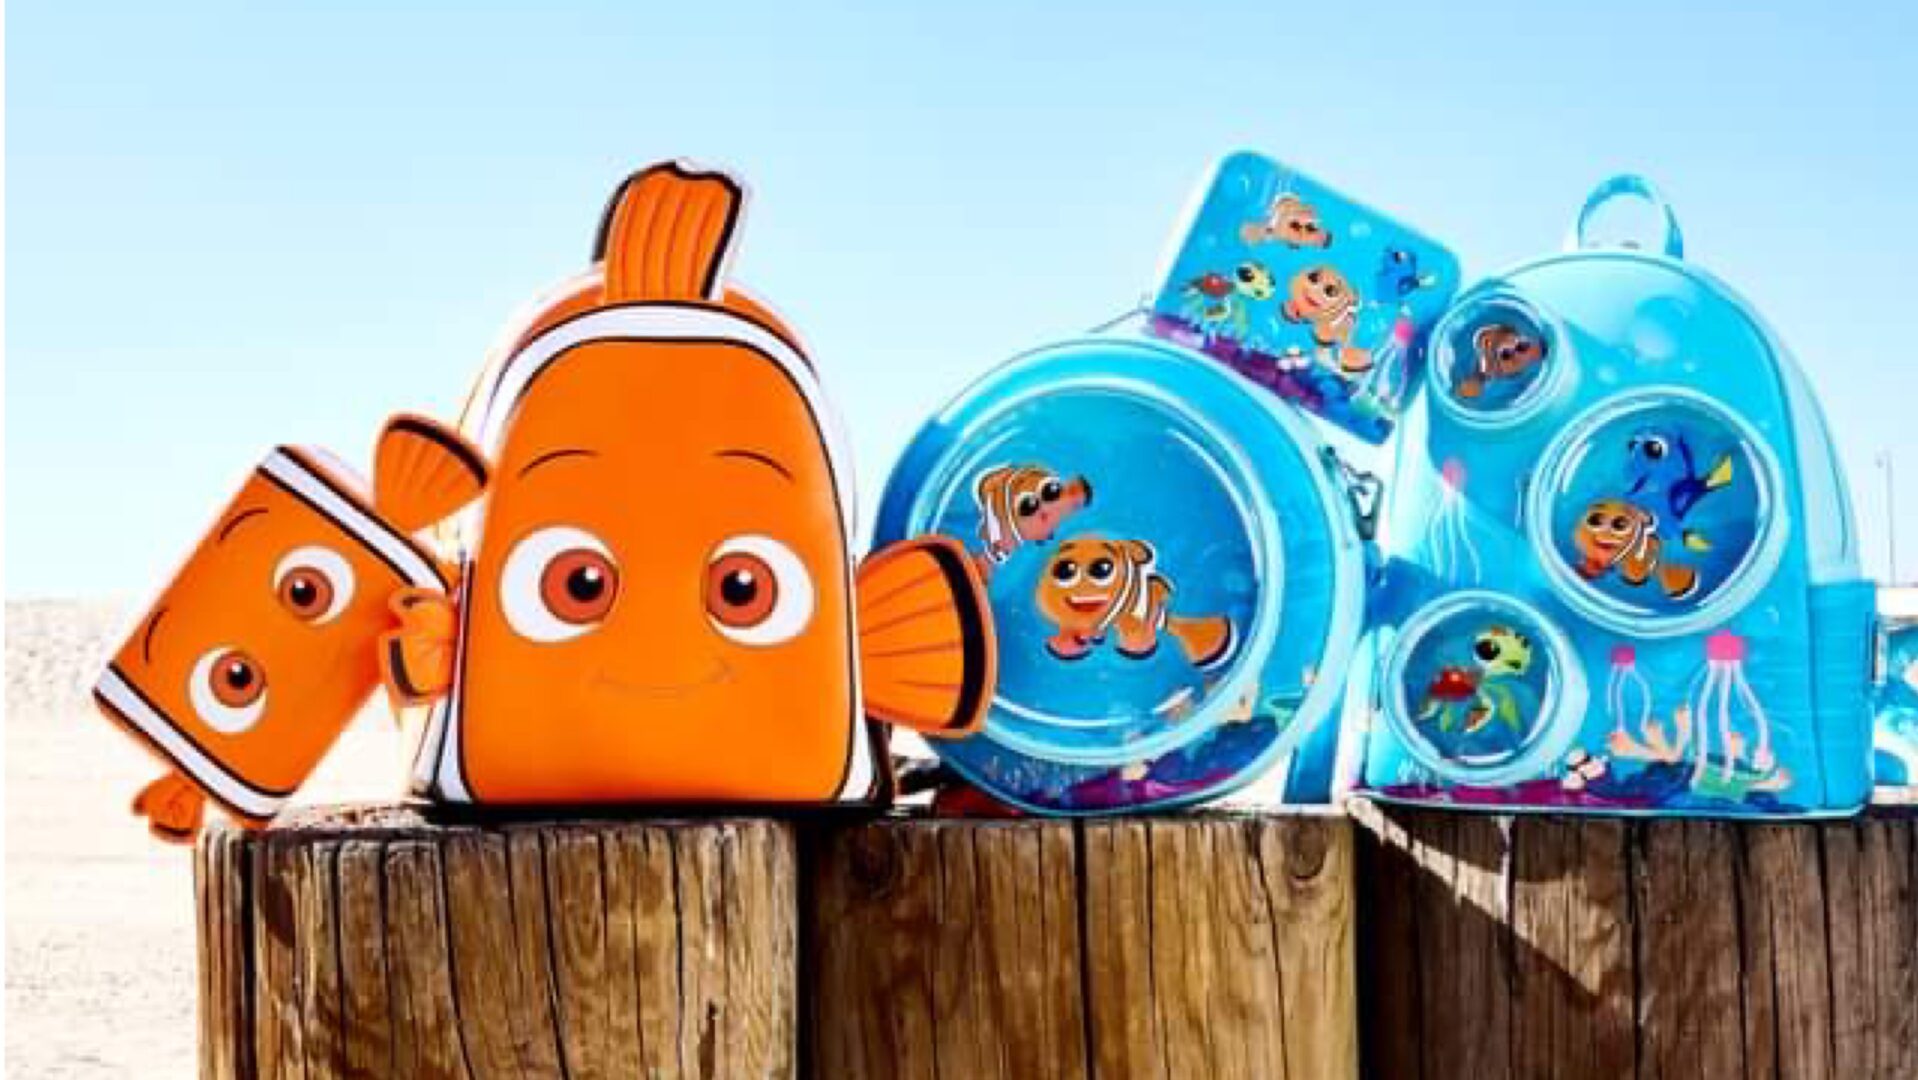 New Finding Nemo 20th Anniversary Loungefly Collection To Add A Splash Of Fun To Your Style!